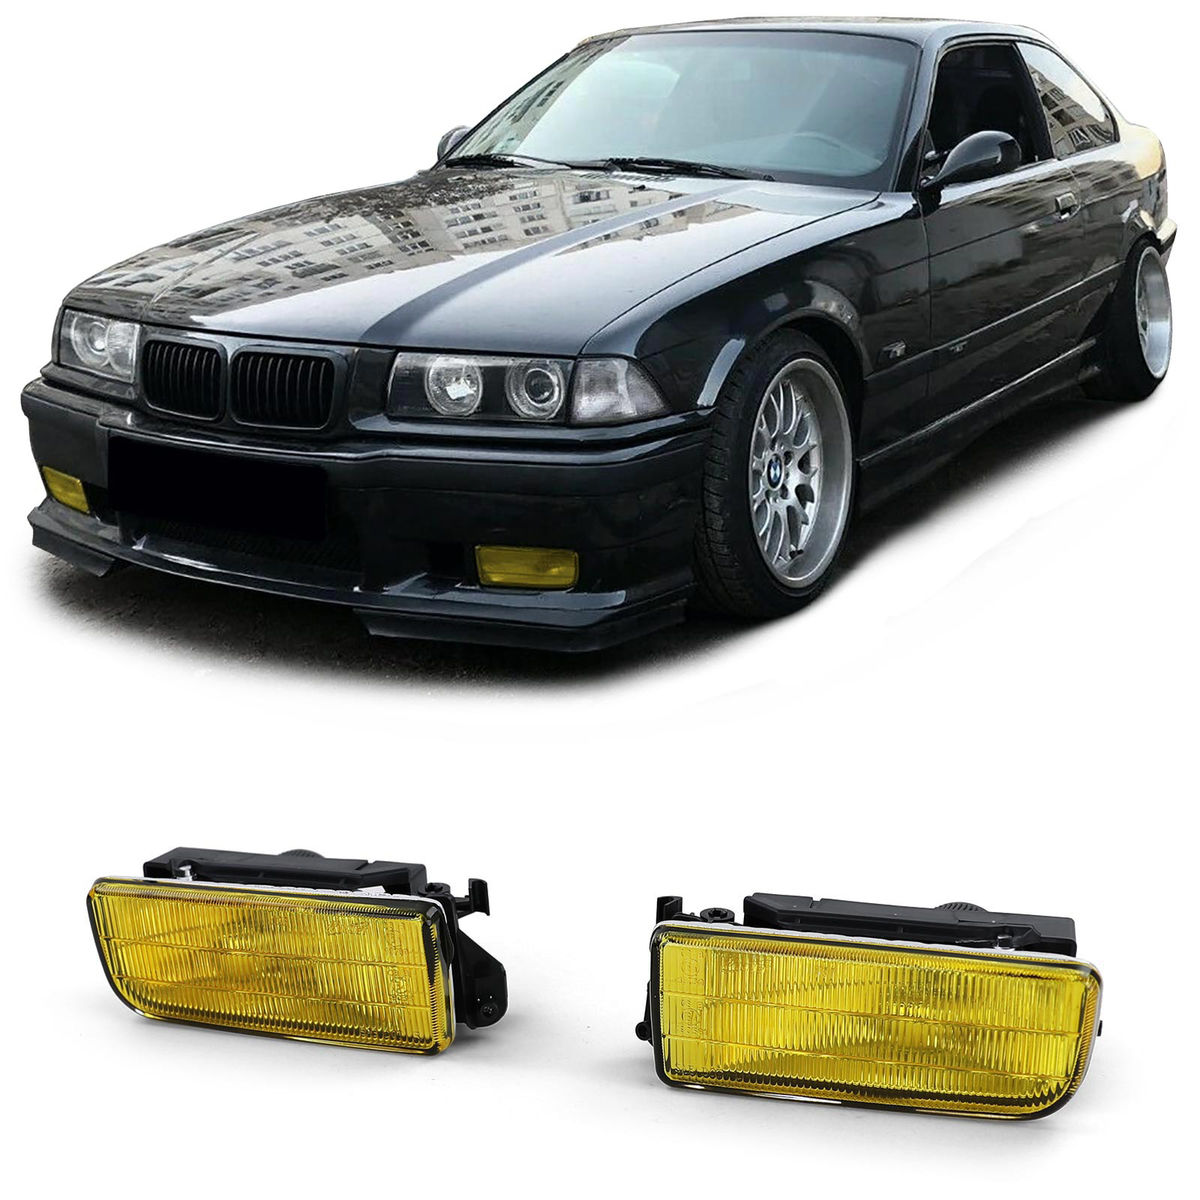 Yellow fog lights with Supporting frame for BMW E36 91-98 All